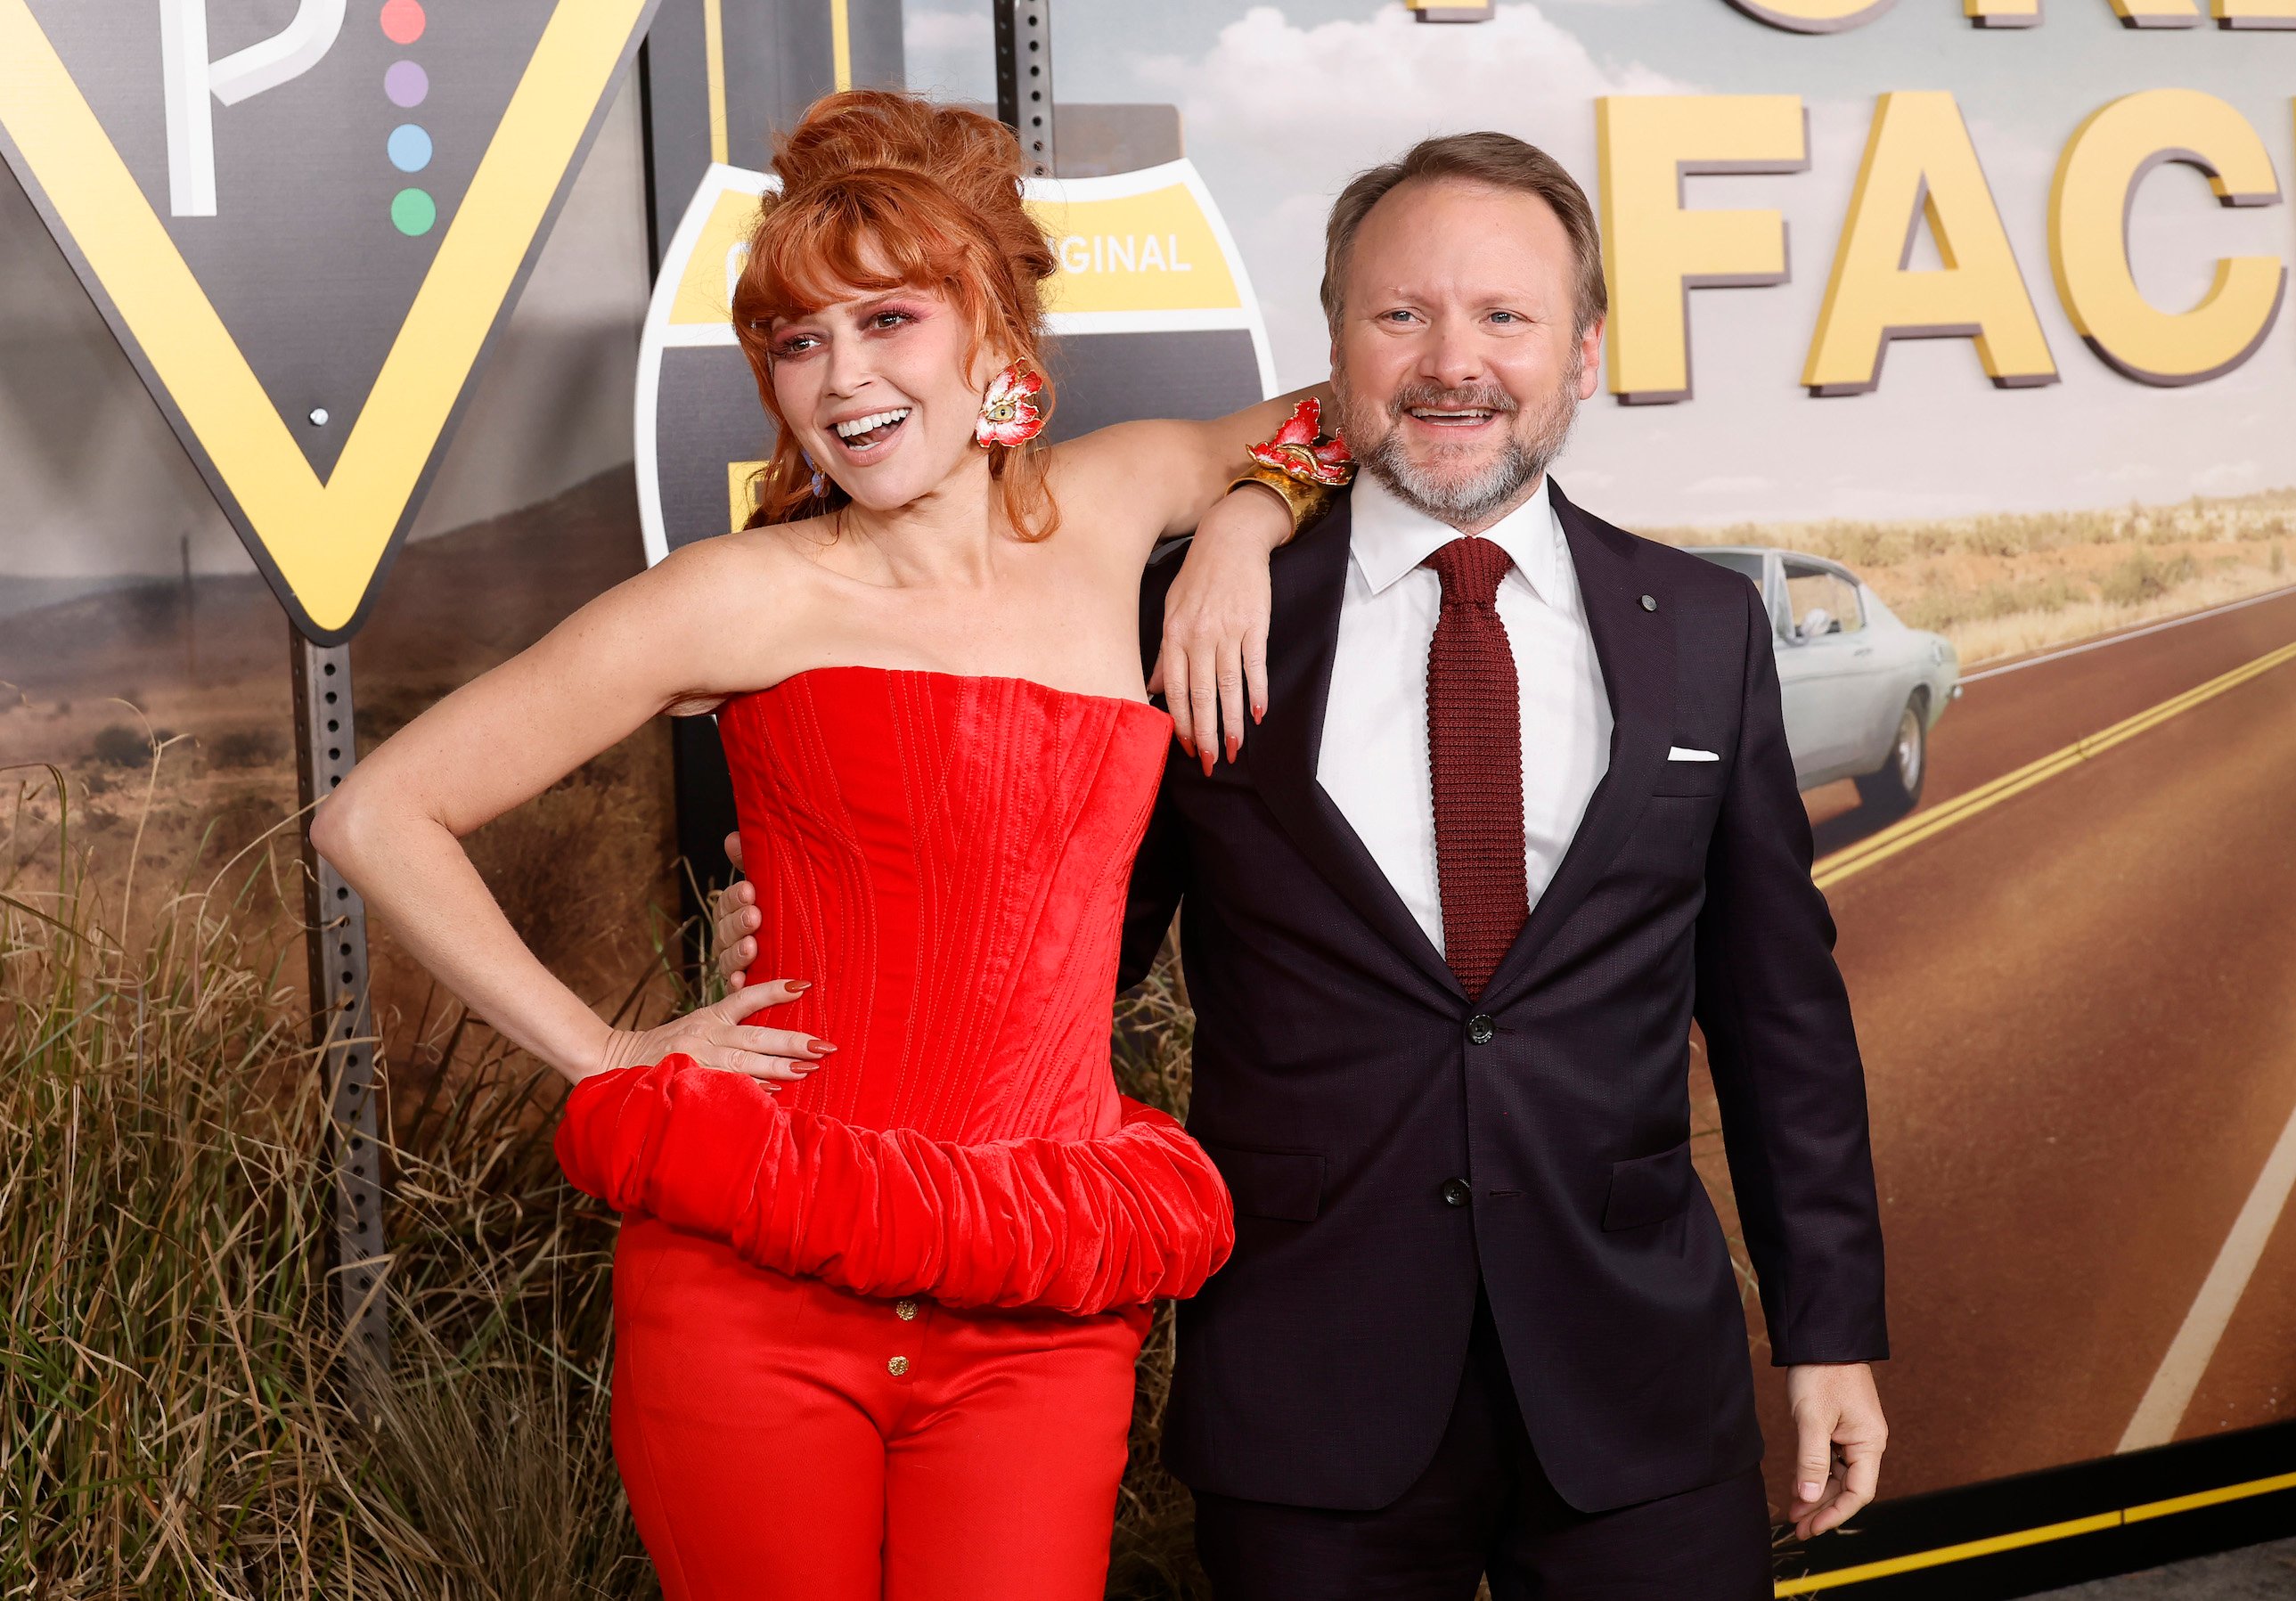 Natasha Lyonna and Rian Johnson attend the Poker Face premiere in Los Angeles